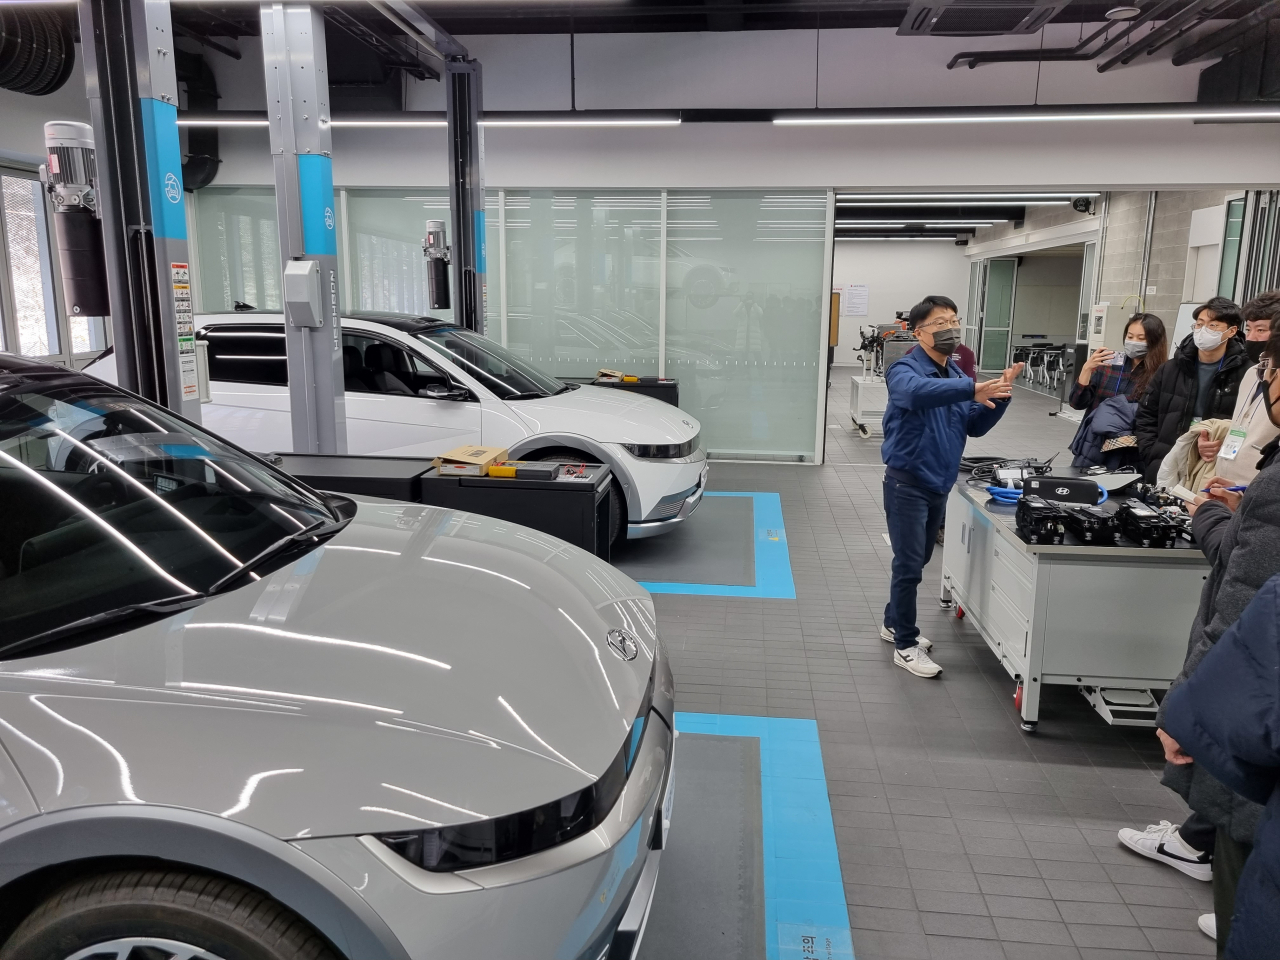 A Hyundai Motor official introduces the training facility for mechanics to reporters at the Global Learning Center in Cheonan, South Chungcheong Province, on Wednesday. (Kan Hyeong-woo/The Korea Herald)